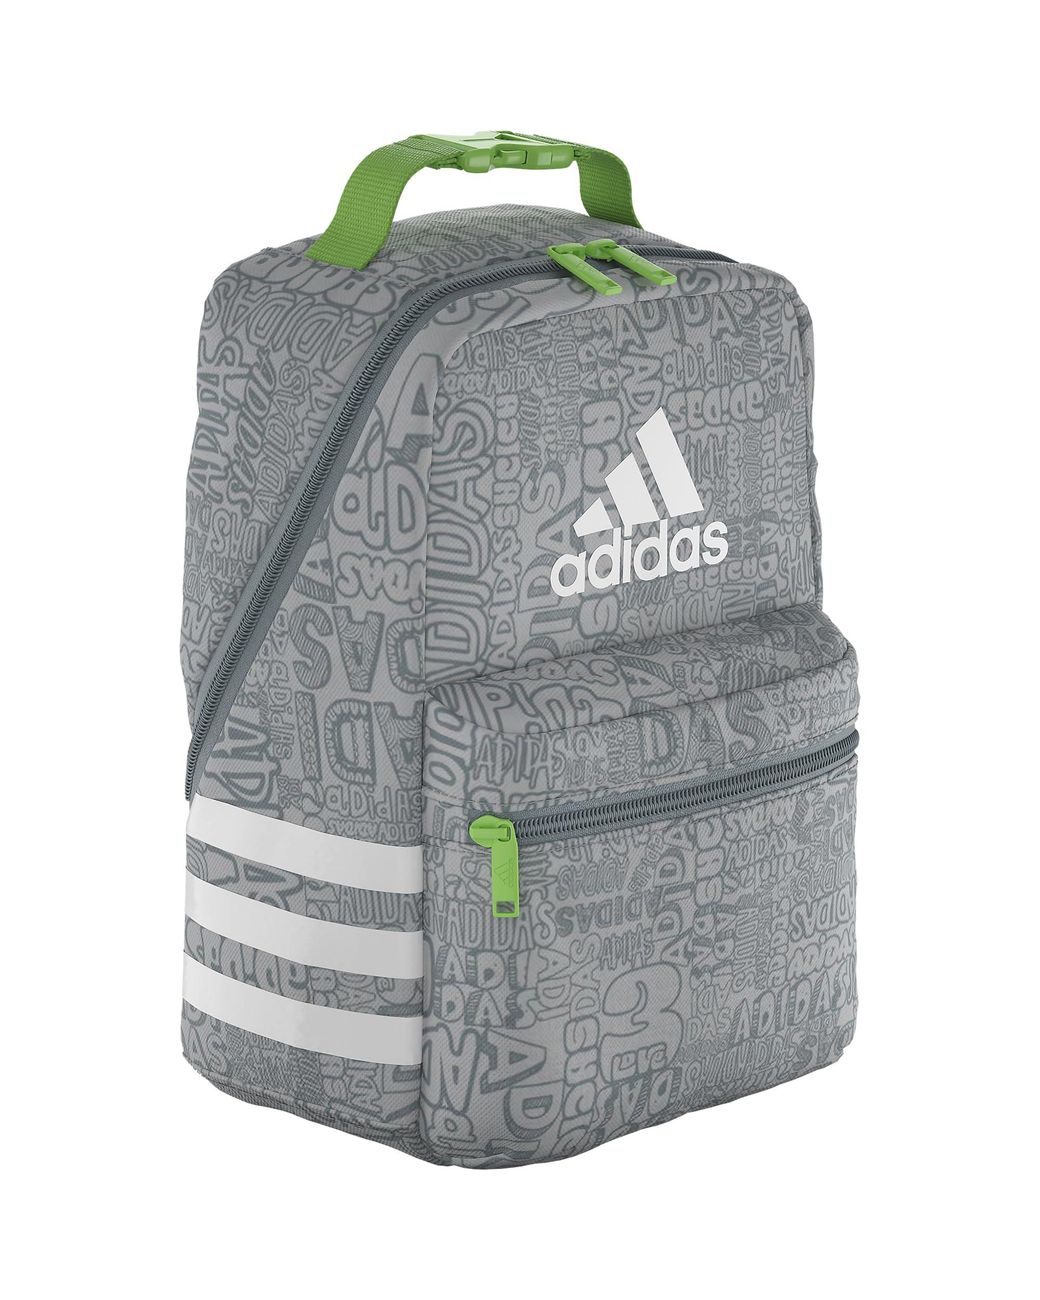 adidas Santiago Insulated Lunch Bag in Gray | Lyst